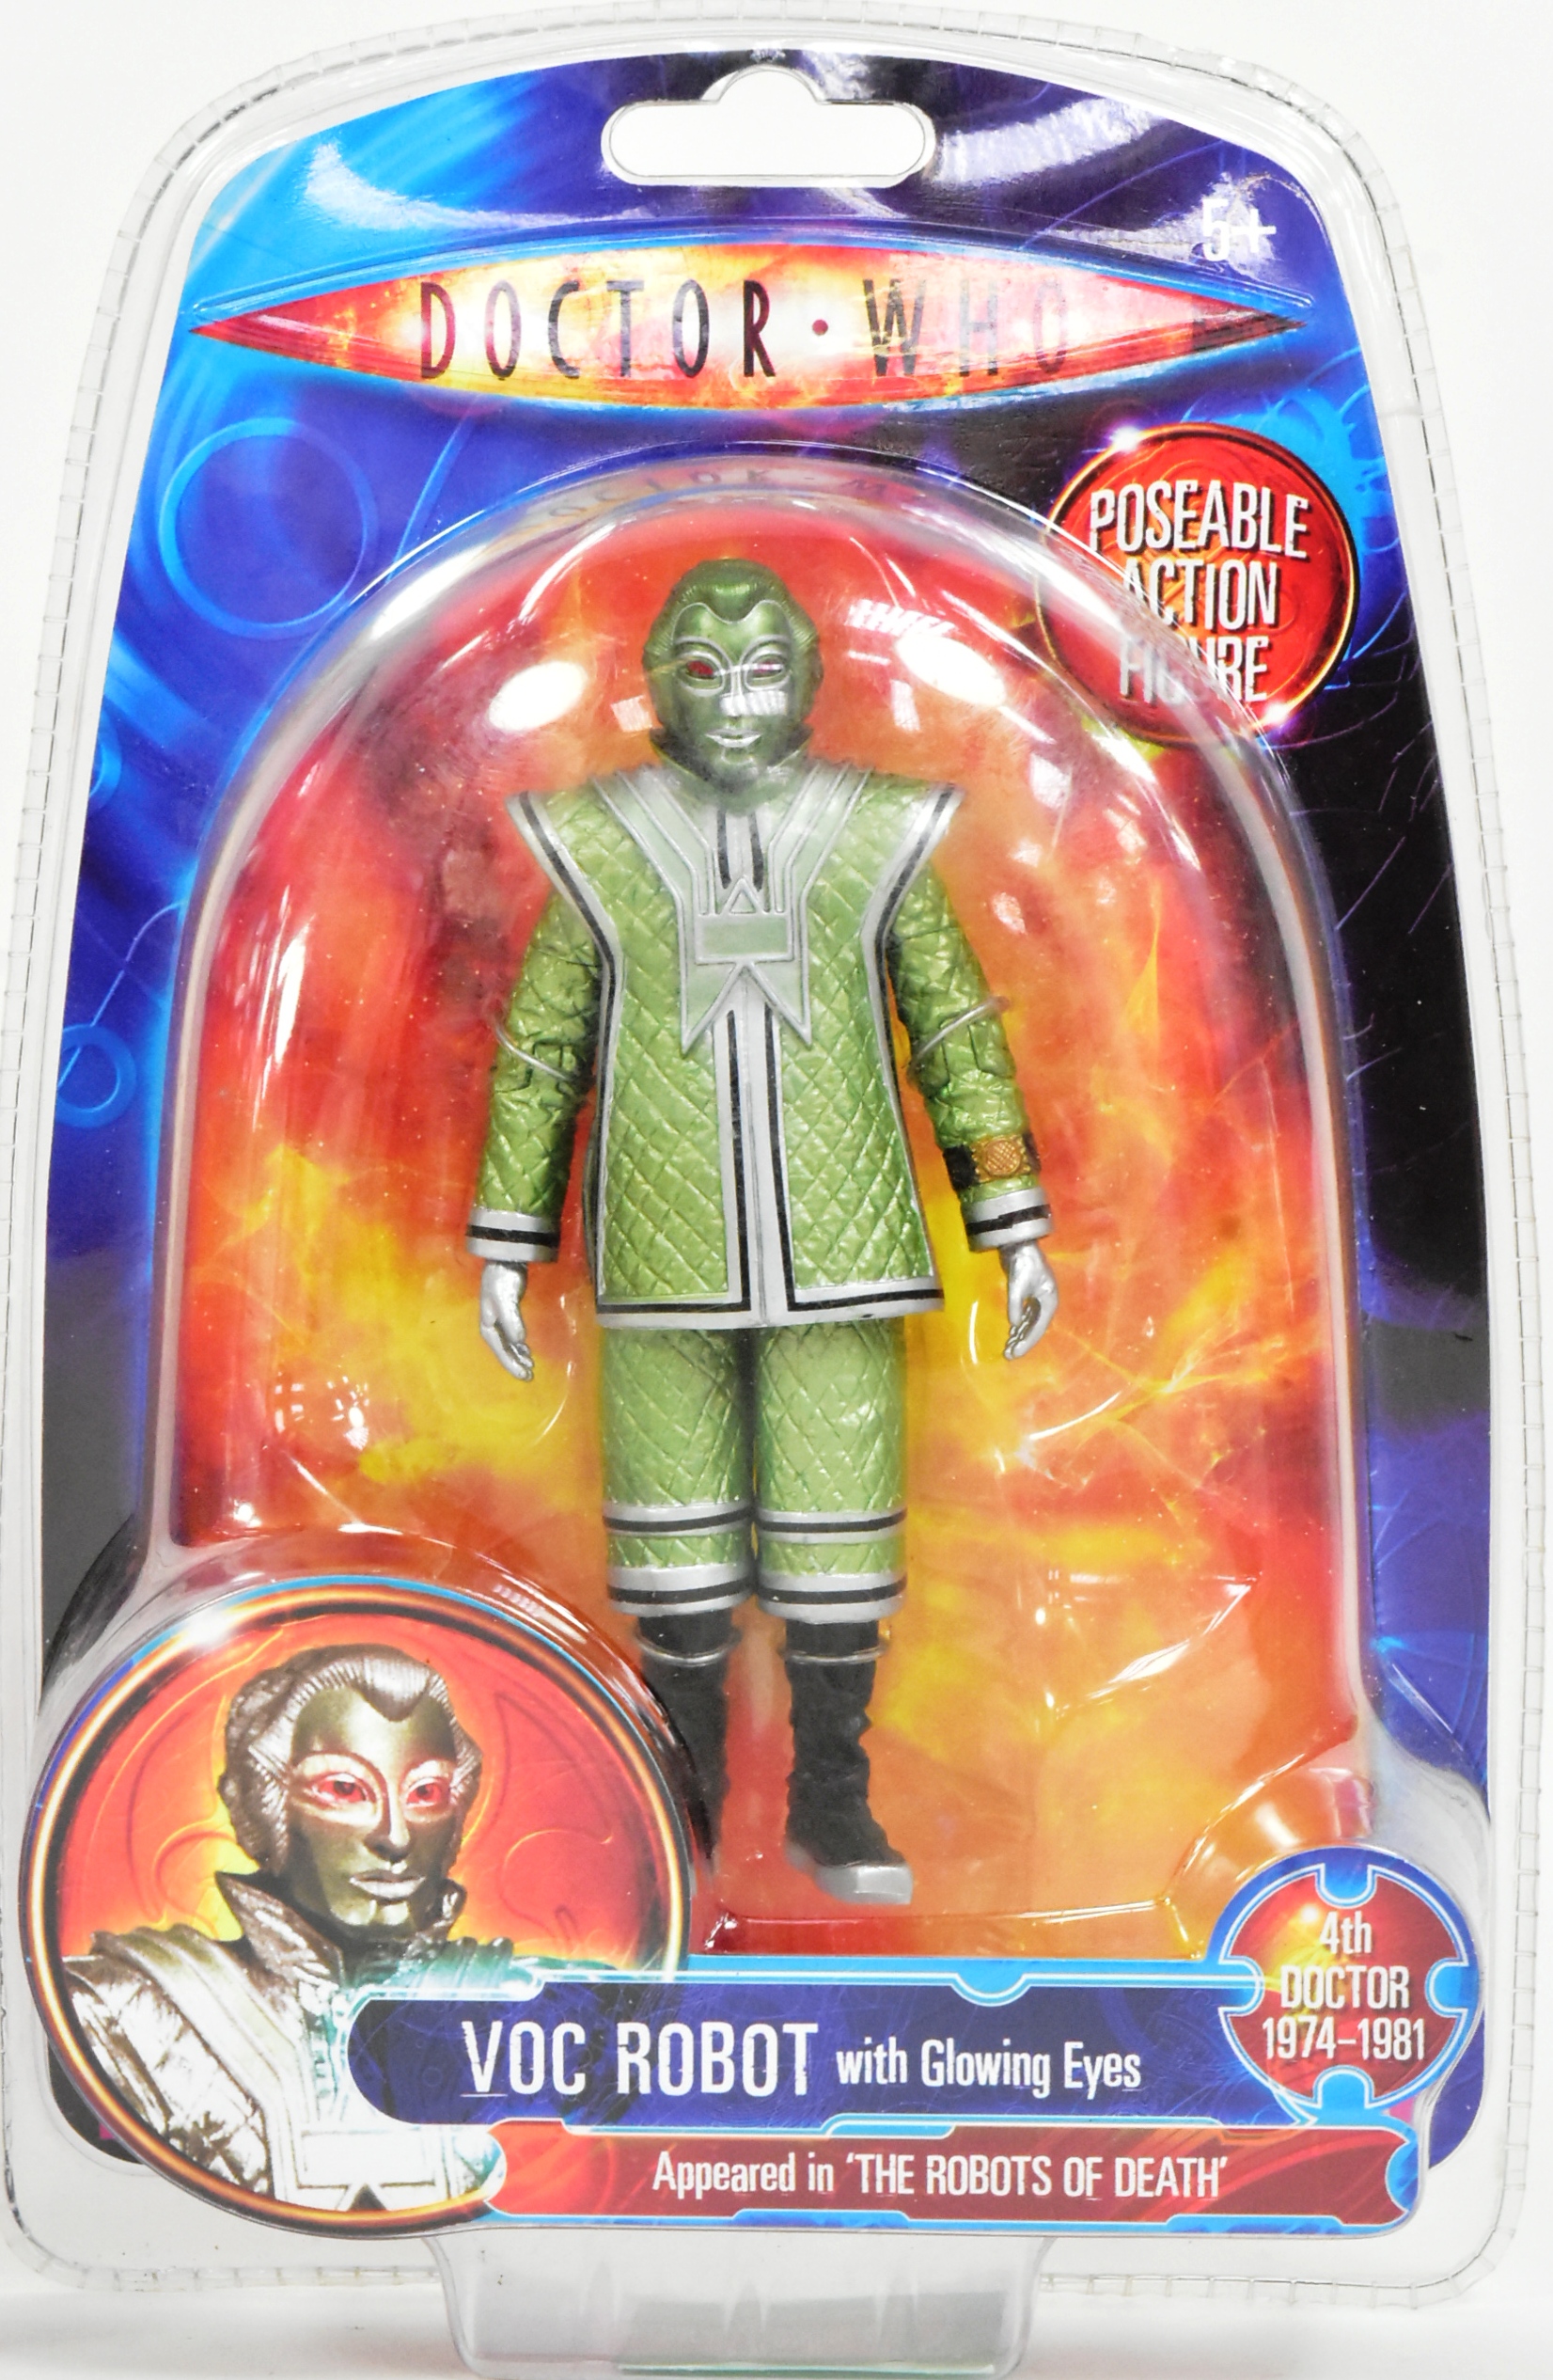 DOCTOR WHO - CHARACTER OPTIONS - VOC ROBOT ACTION FIGURES - Image 5 of 5